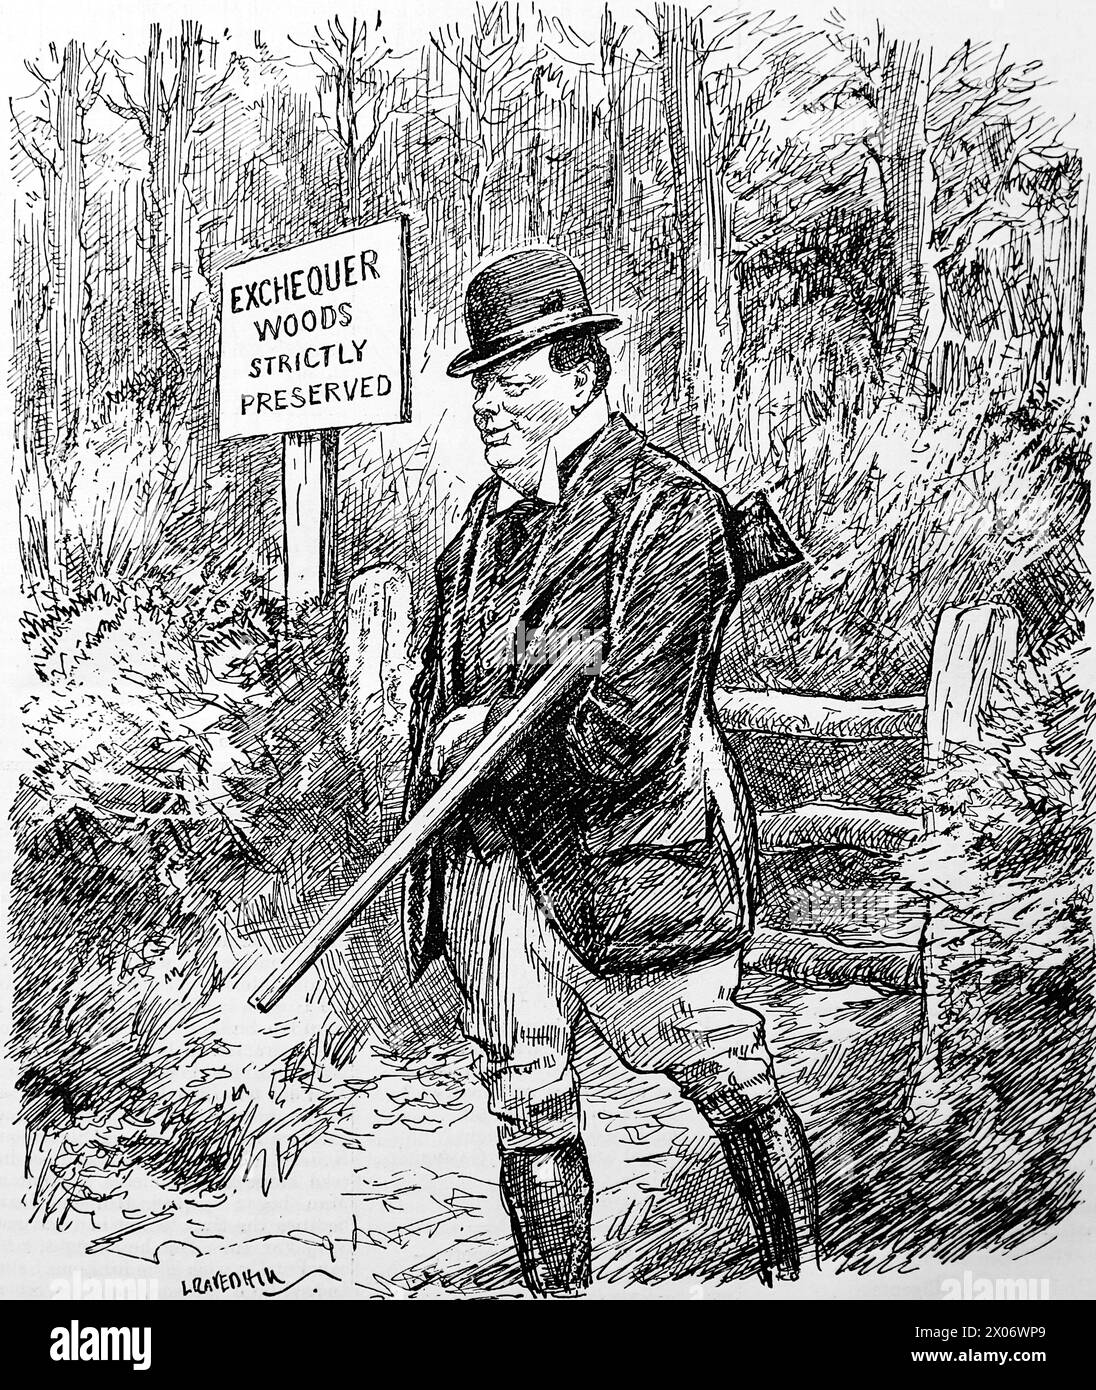 The Poacher Turned Keeper by Leonard Raven Hill, 19 November 1924, showing Winston Churchill carrying a shooting rifle. Photograph from a line drawing originally printed in the Punch and London Charivari periodical in 1924. This is a good example of the skilful artists and the humour and satire of the time. Stock Photo